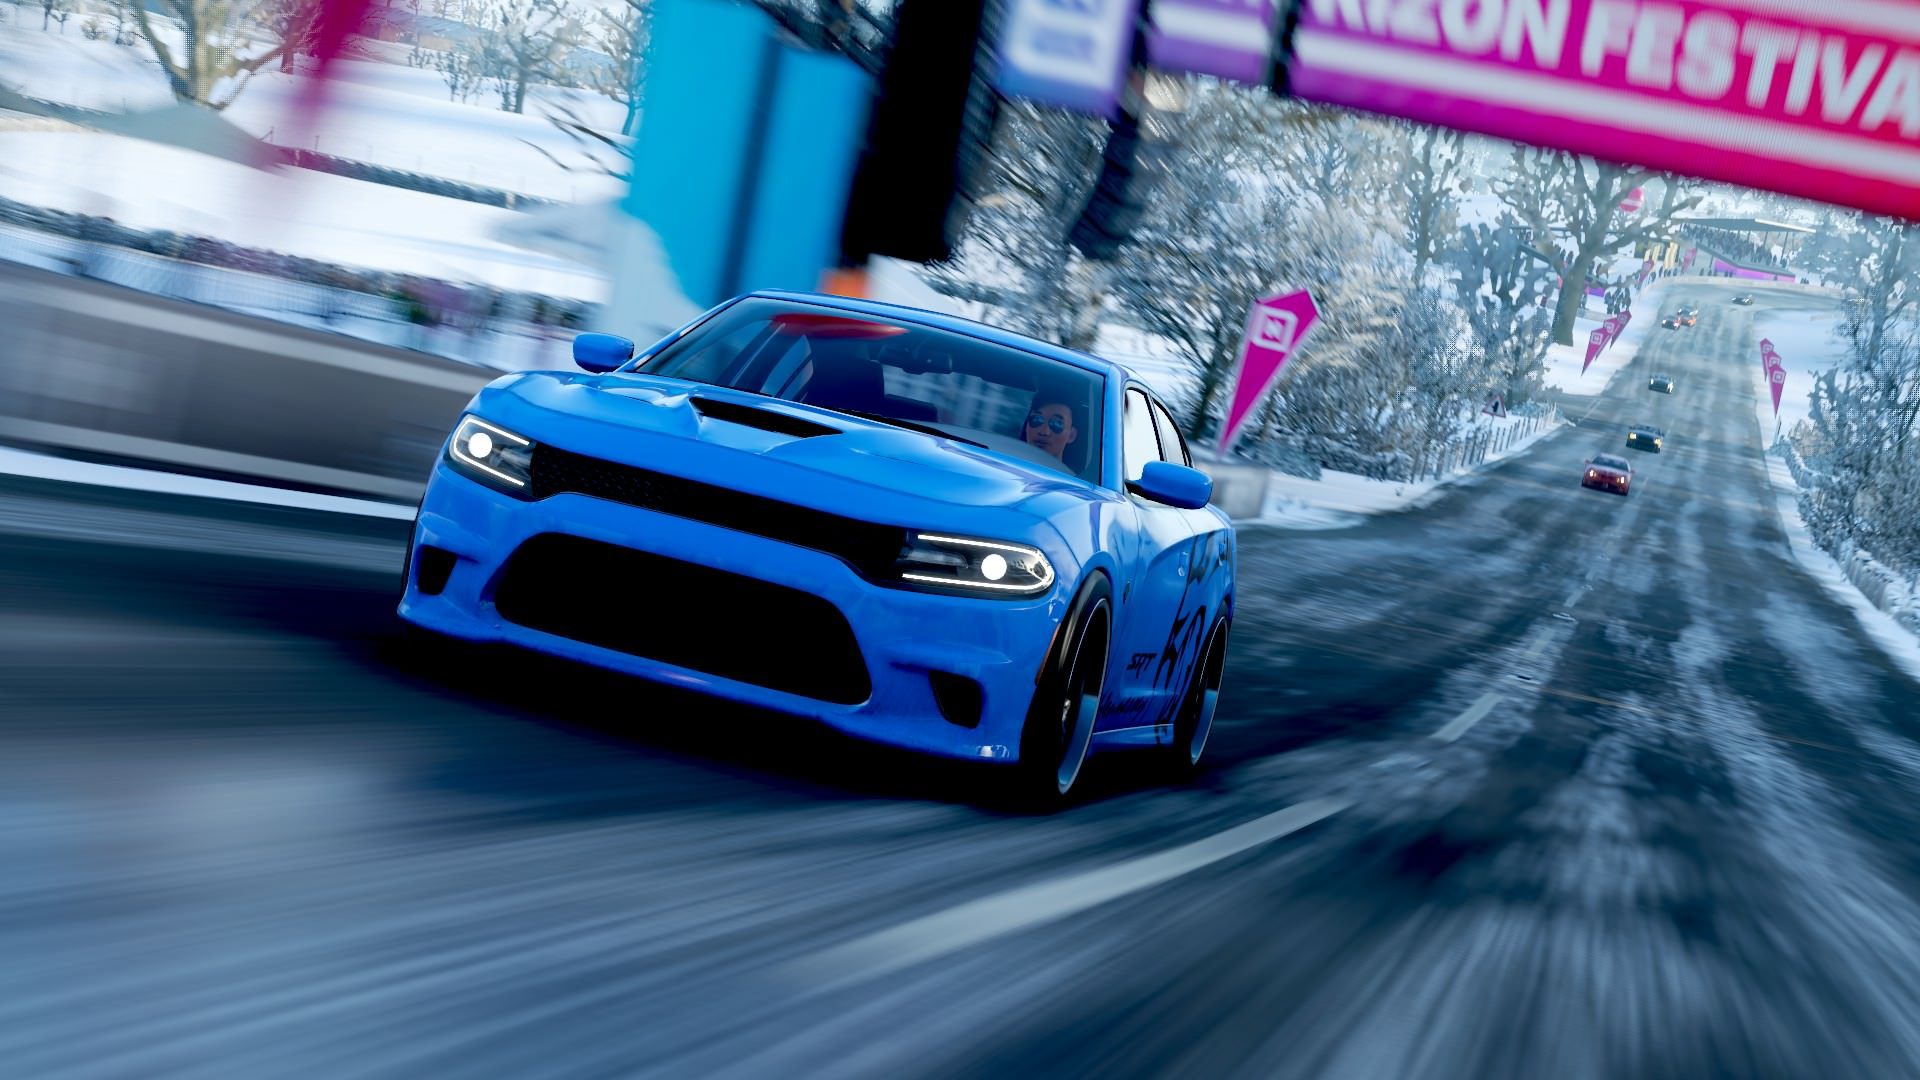 RWD domination in the current Winter Modern Muscles seasonal 1: Cierra Mercer braves the cold with her Charger Hellcat.